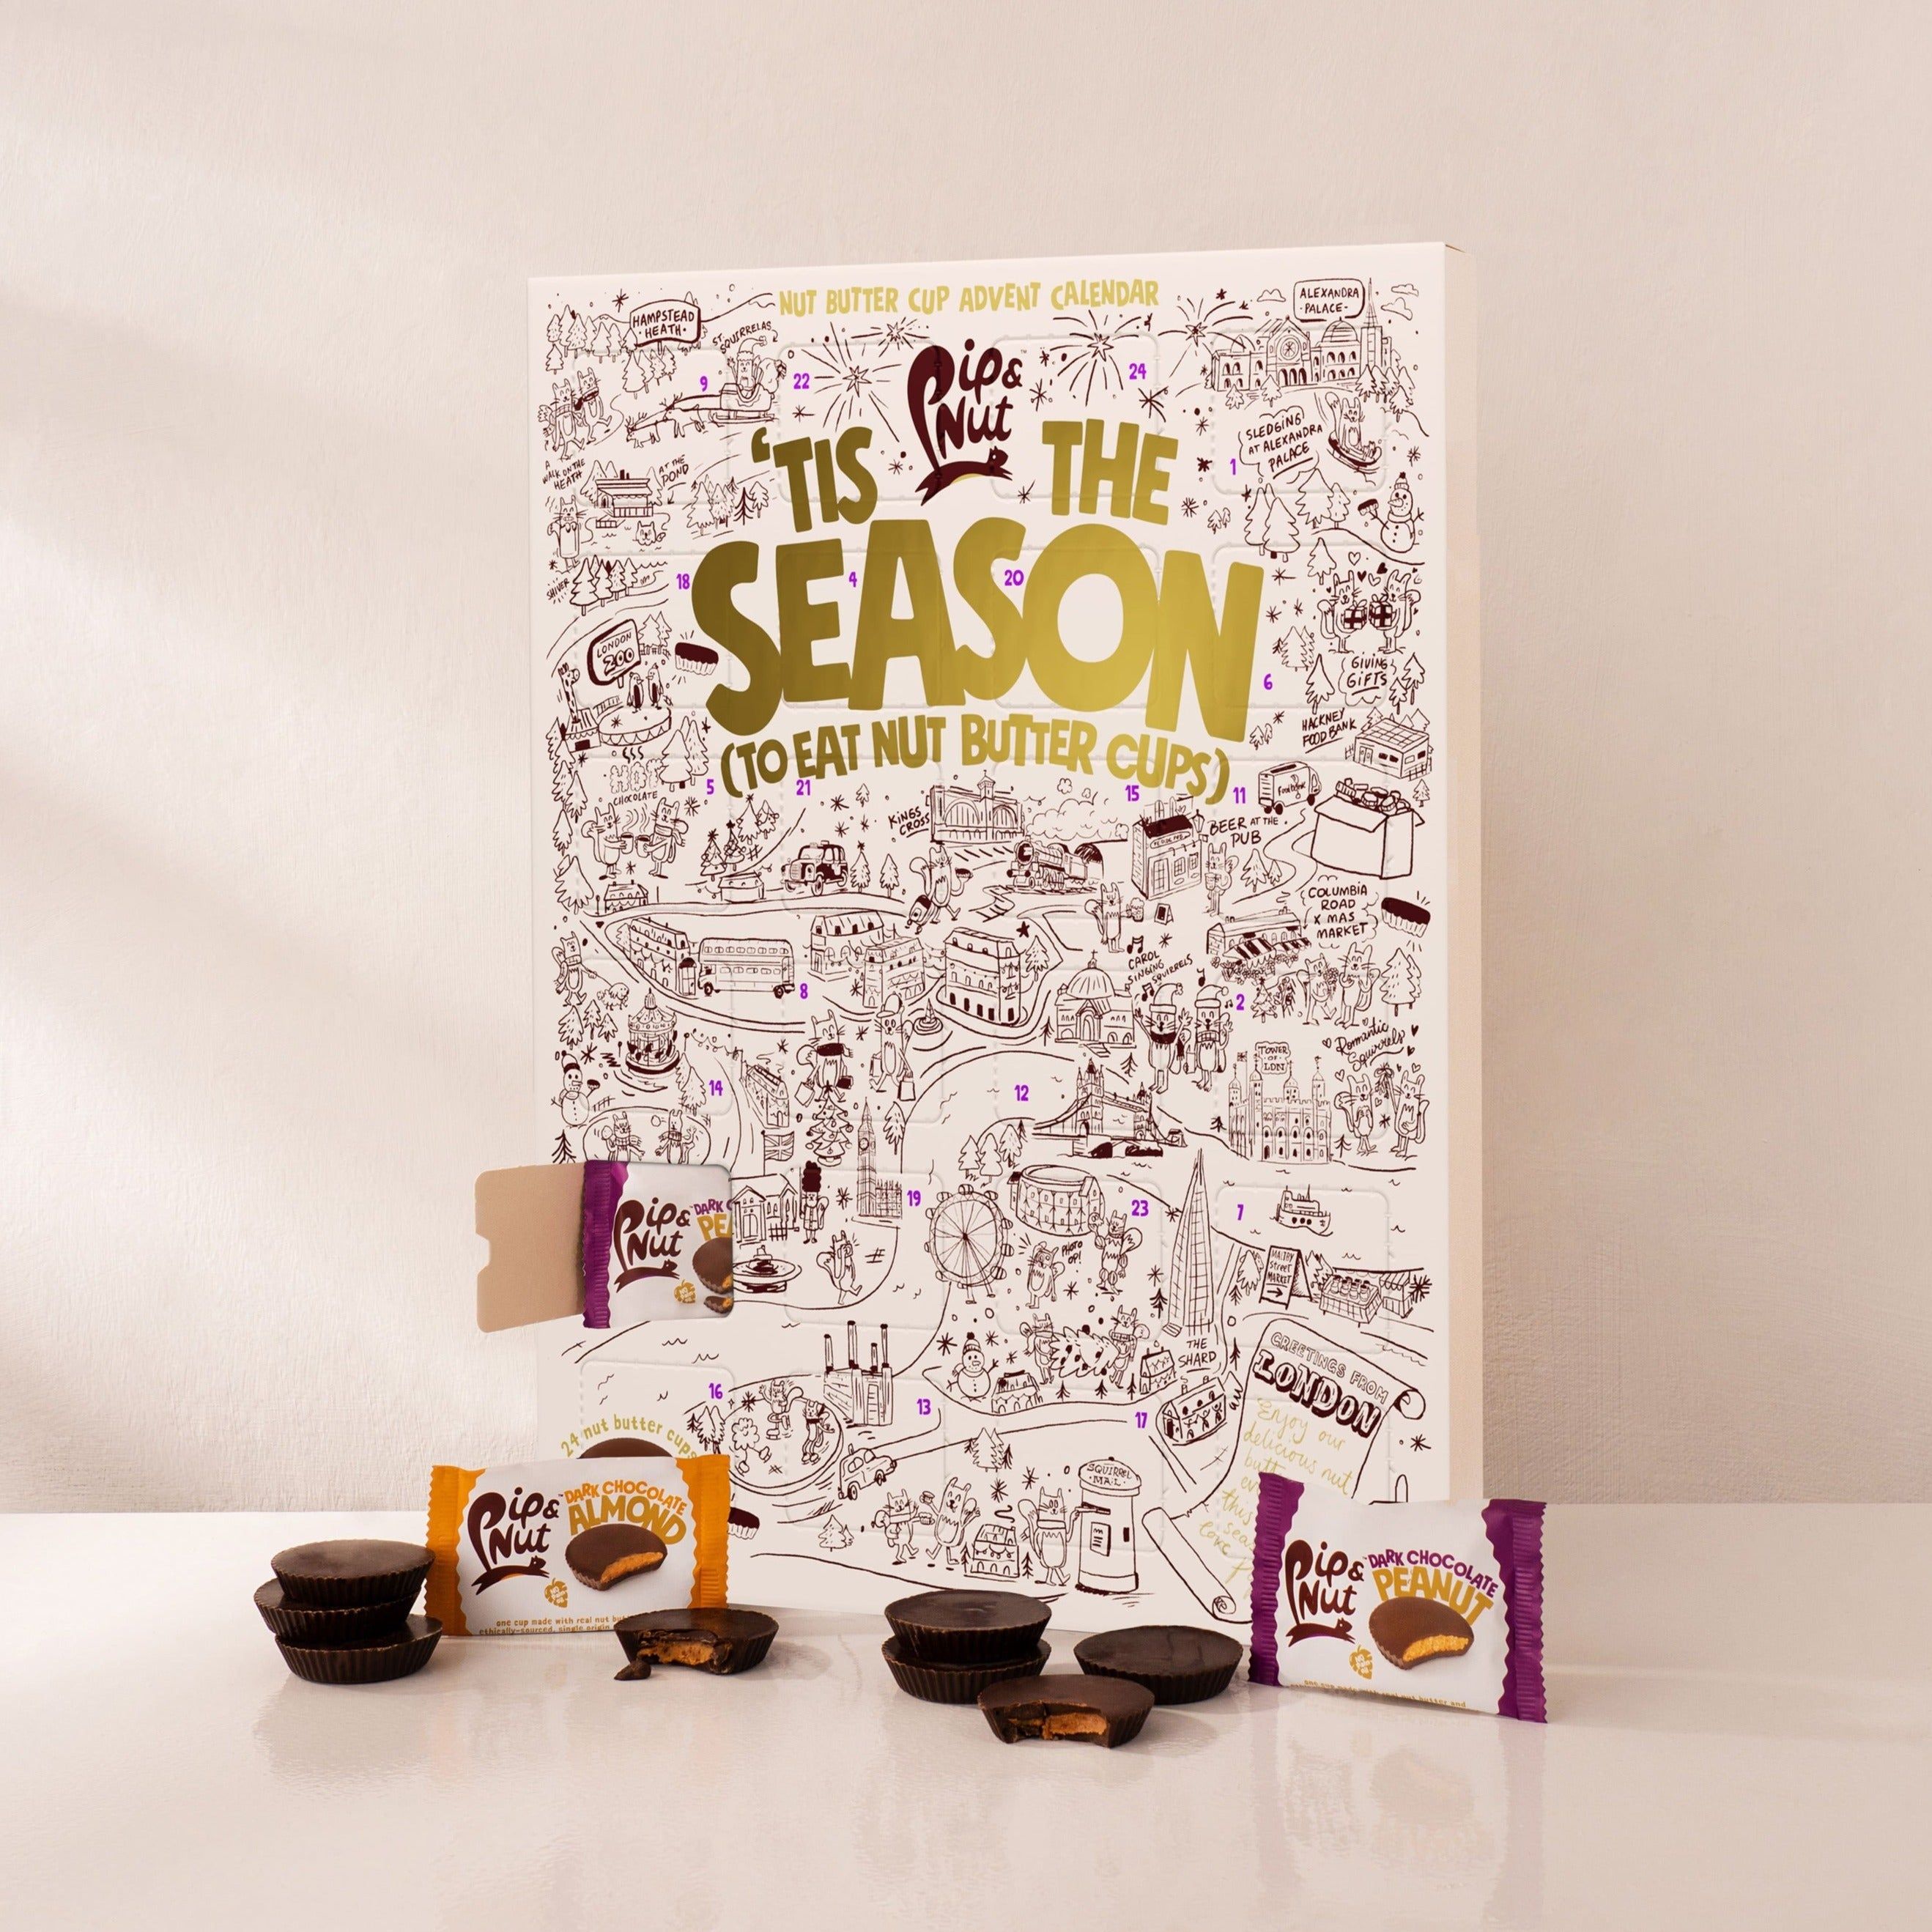 Sports advent calendars The best for runners